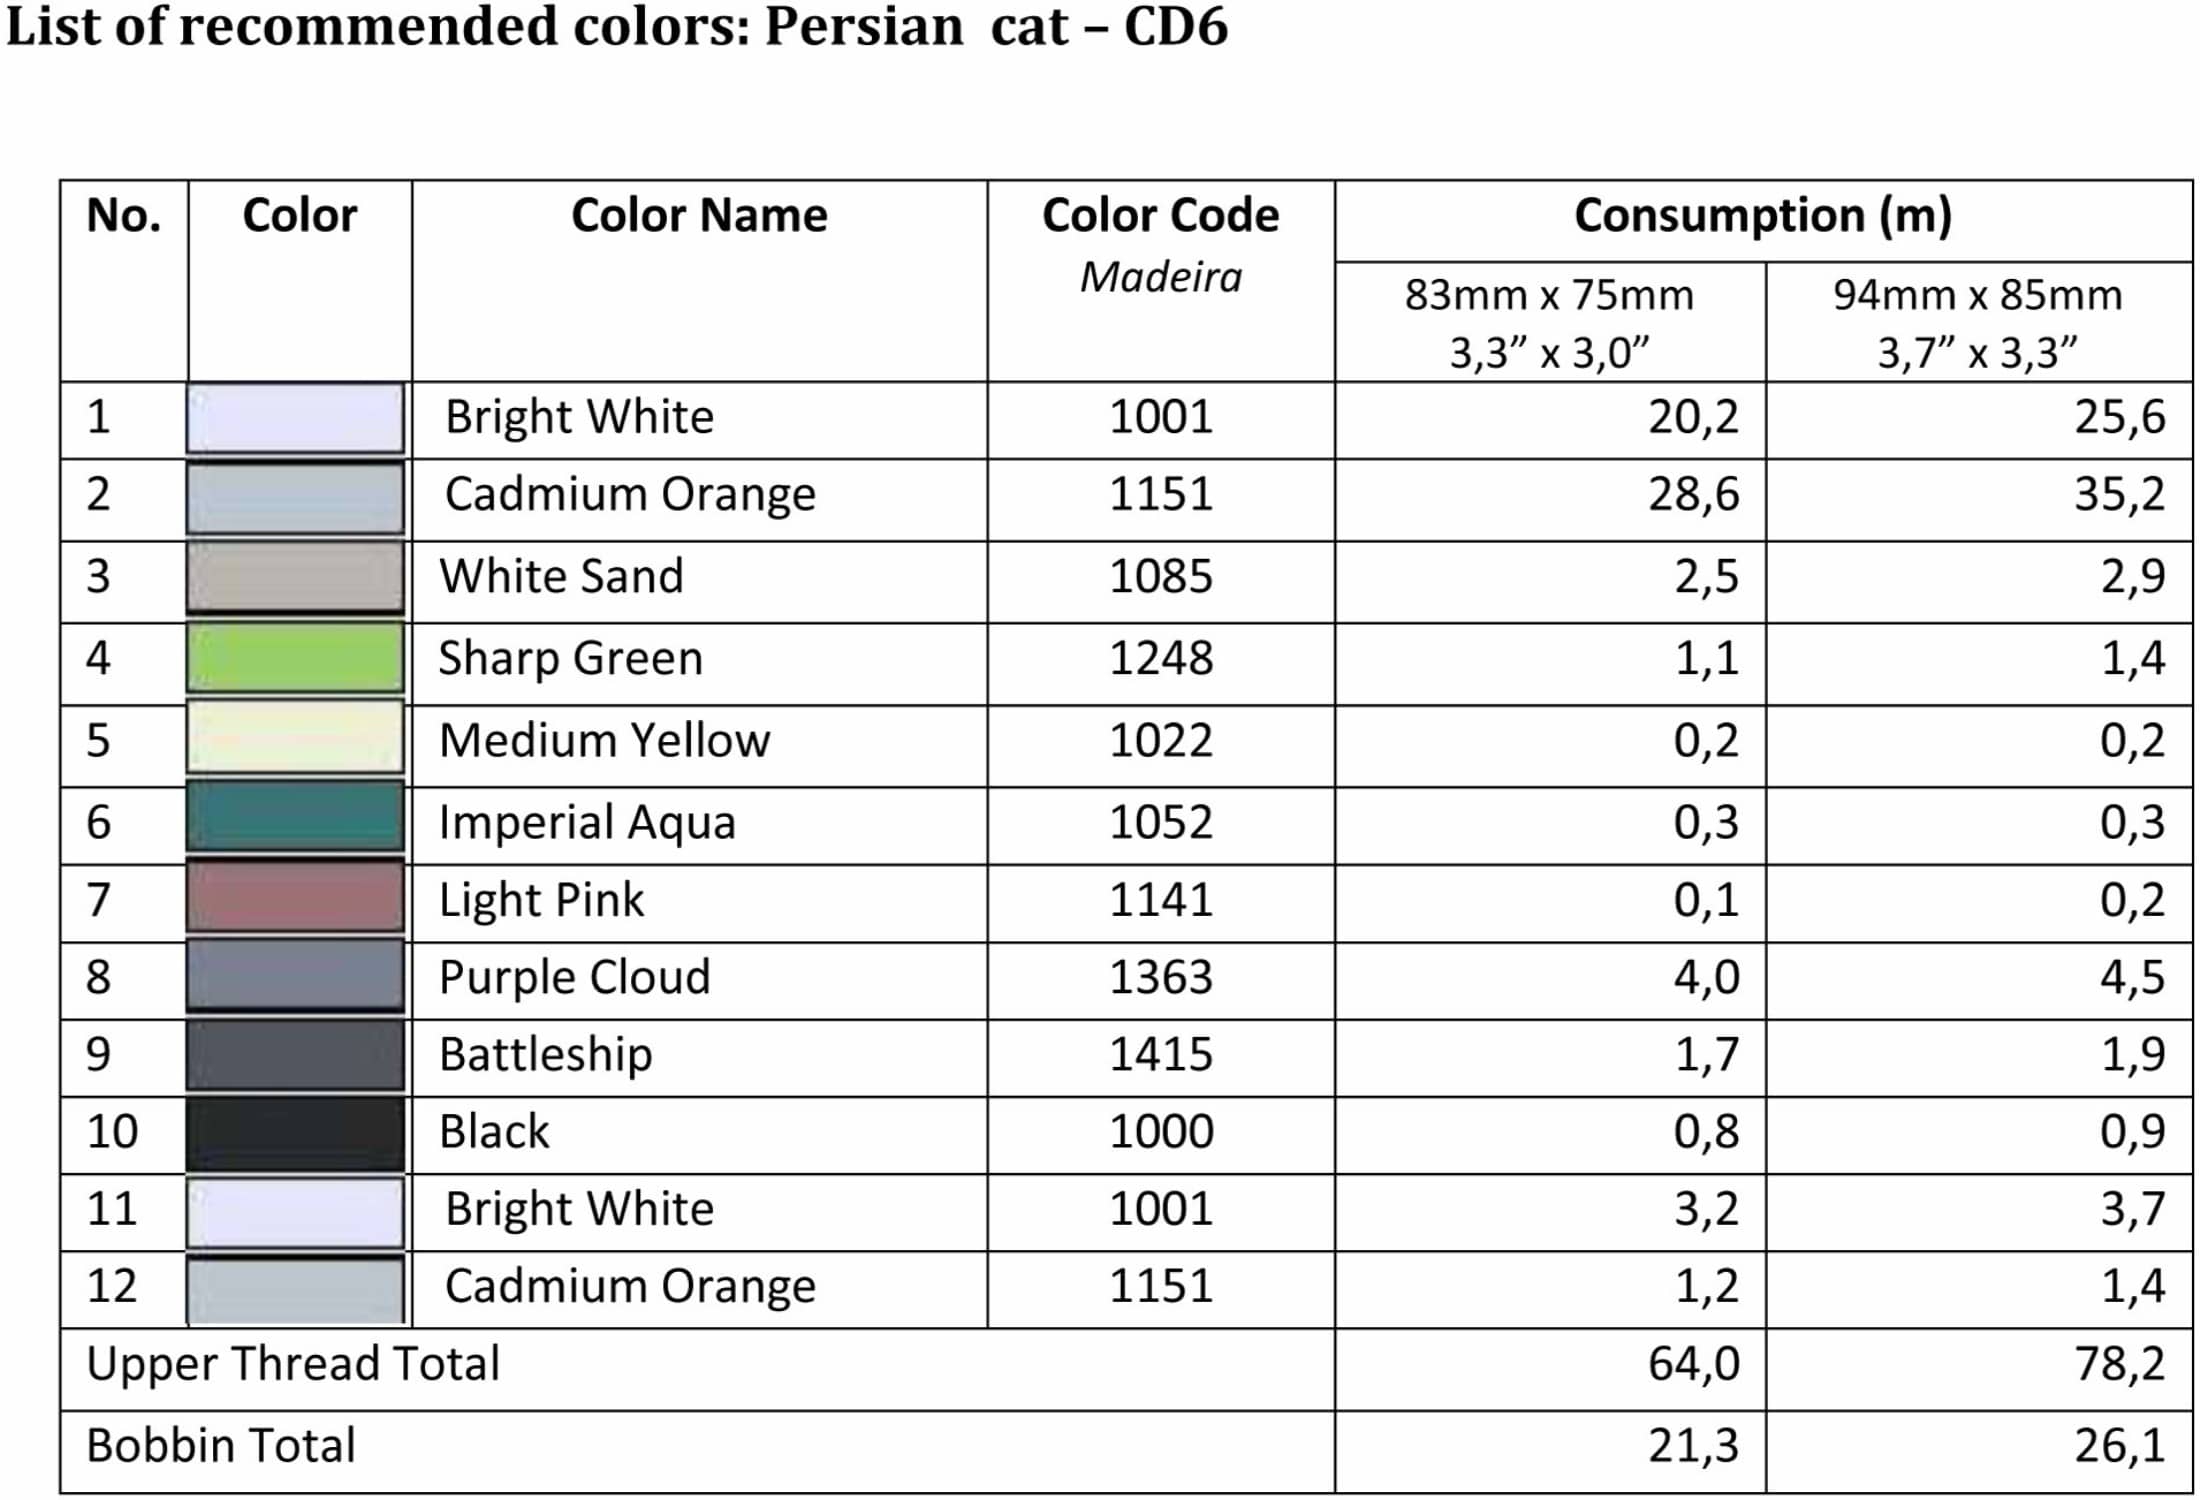 List of Recommended Colors -Persian CD6